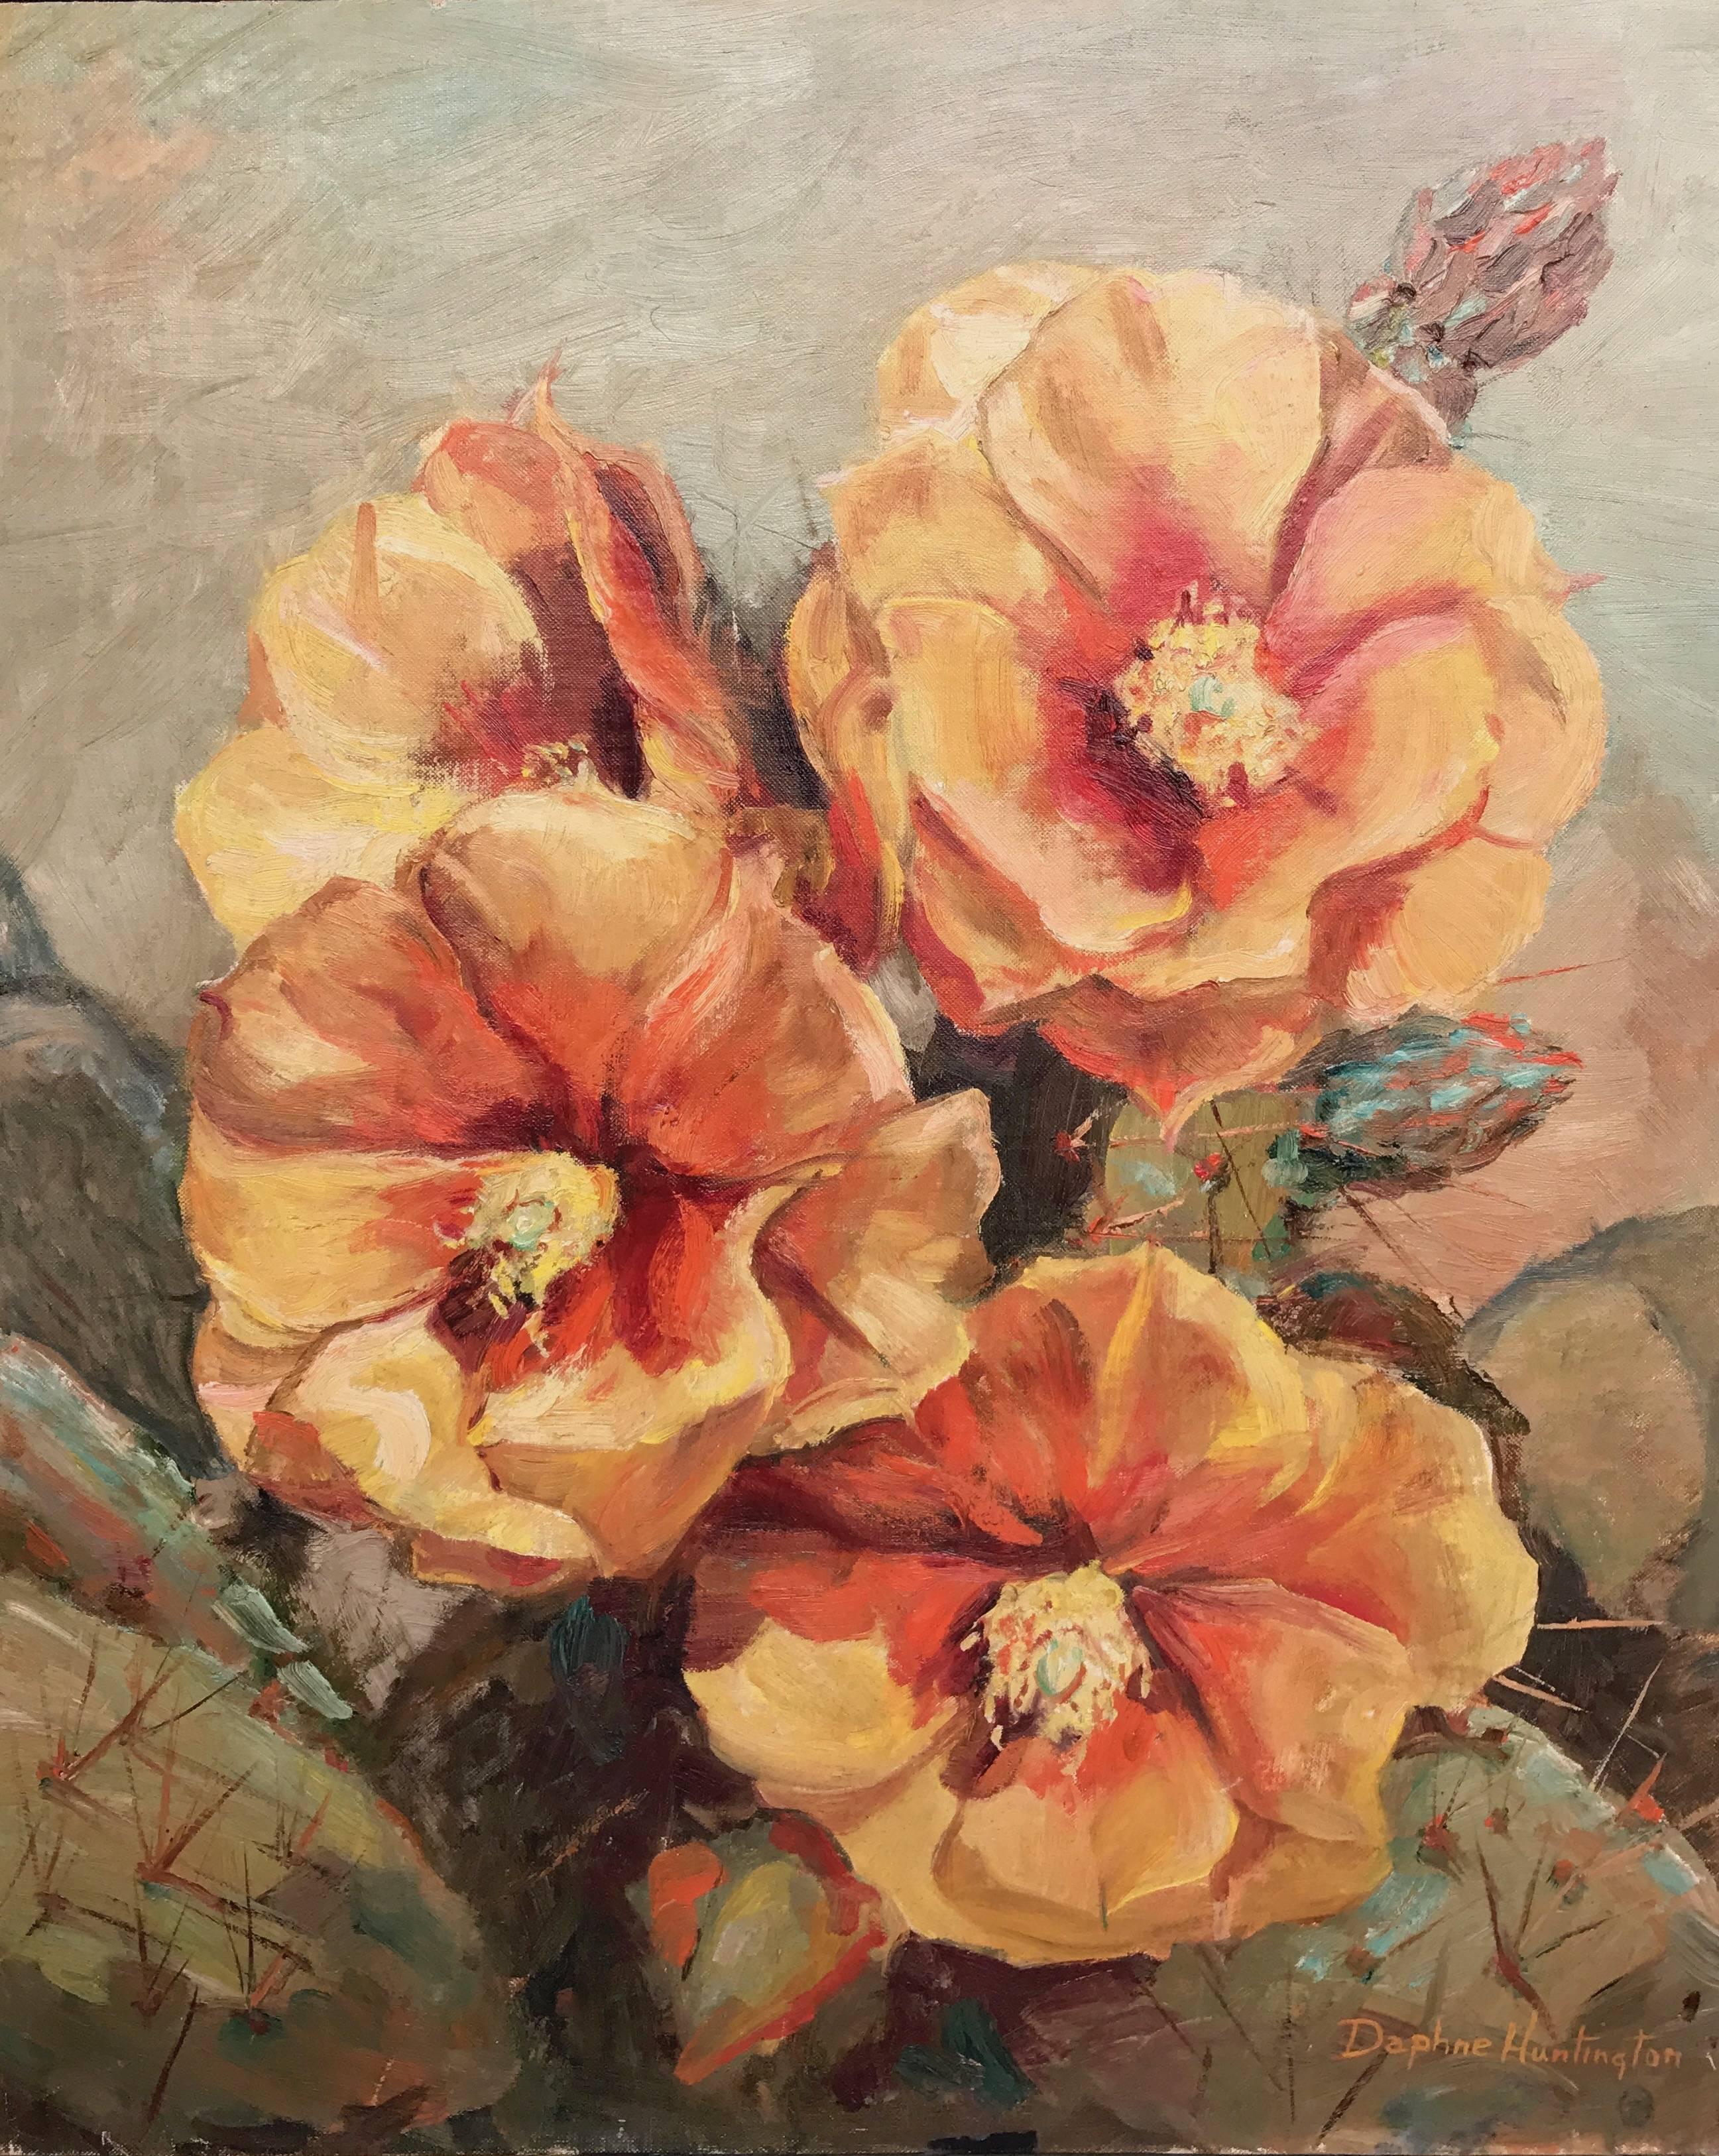 Sisters Venetia Epler and Daphne Huntington are California artists whose work is represented in several permanent collections: the San Bernadino County Museum, the De Saisset Gallery, the Santa Clara Museum, the Mary Pickford Collection and the